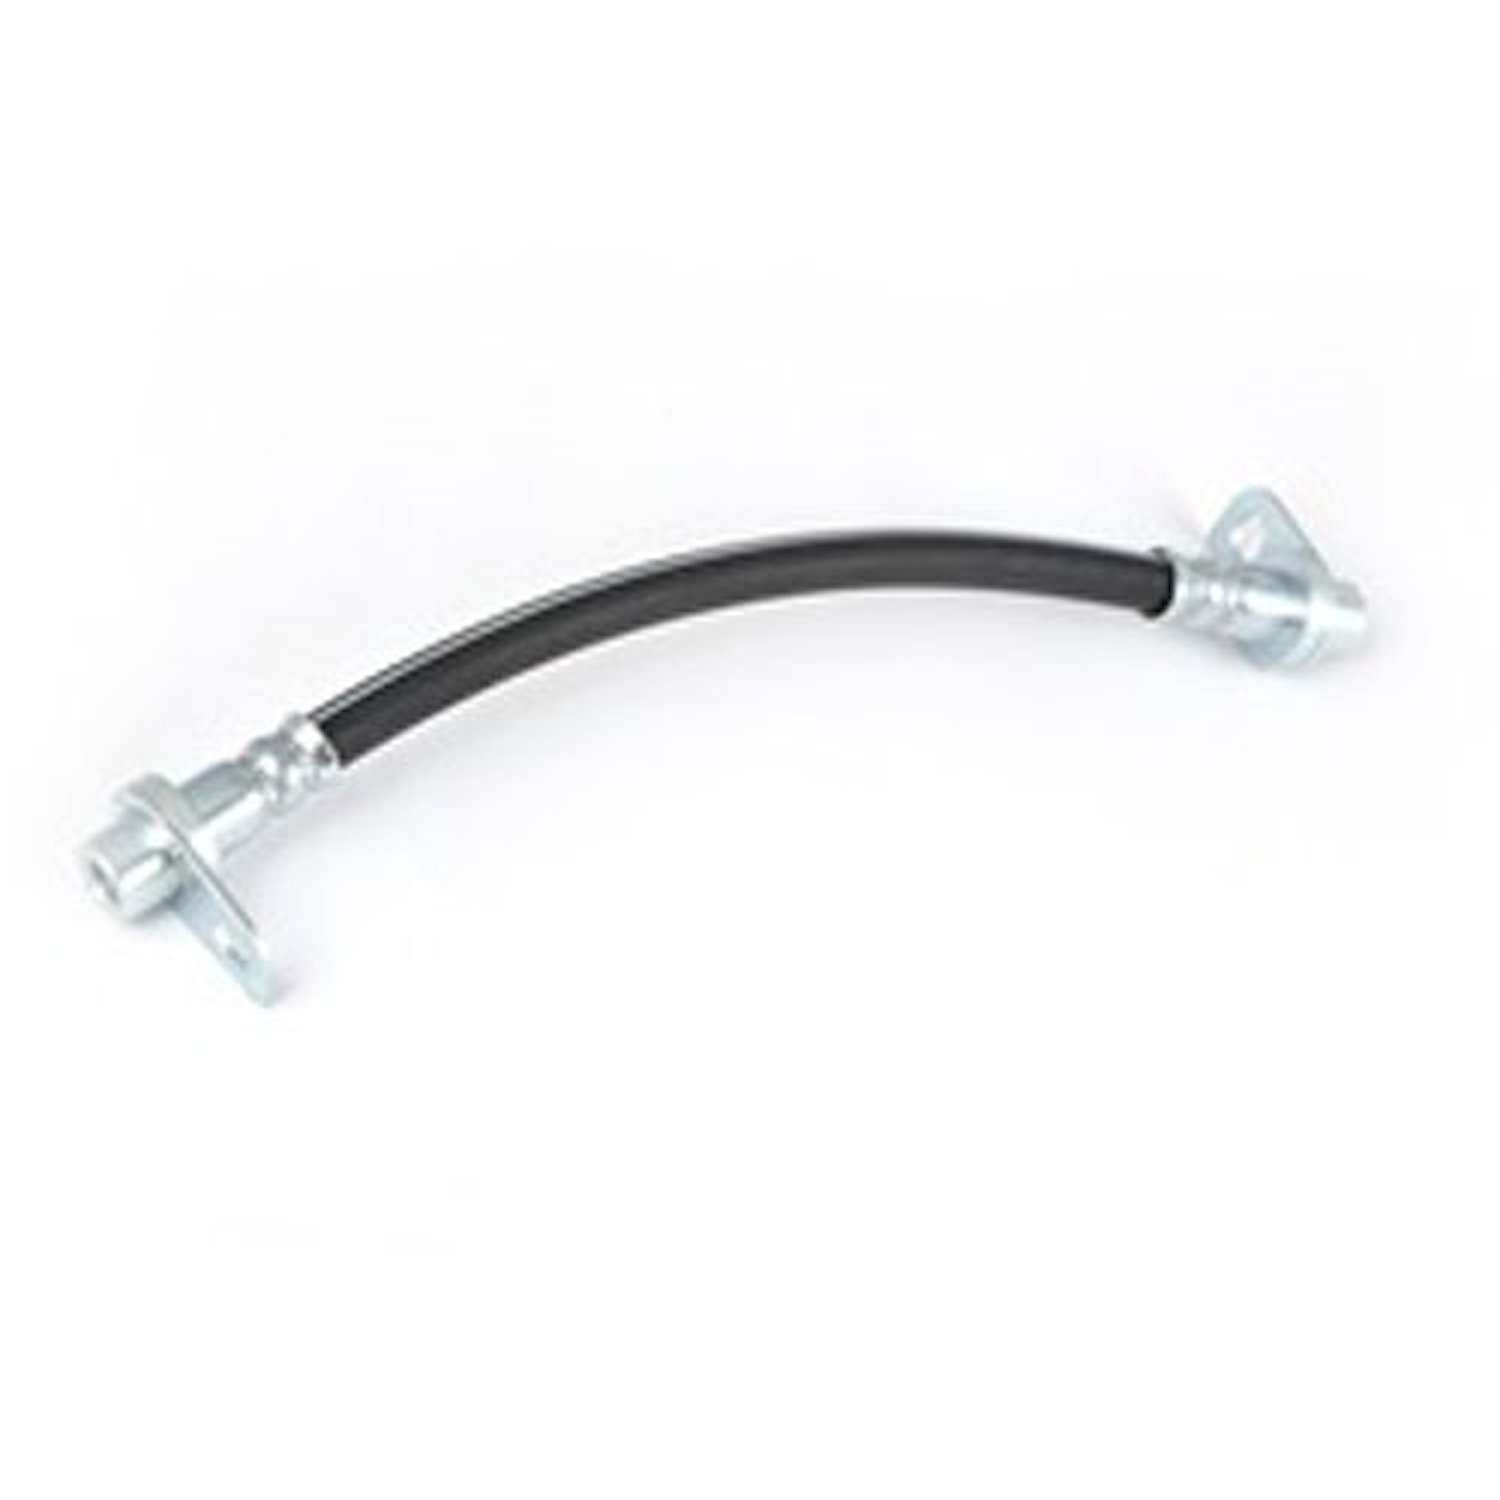 This left rear brake hose from Omix-ADA fits 07-13 Jeep Compass and Patriots with rear disc brakes.